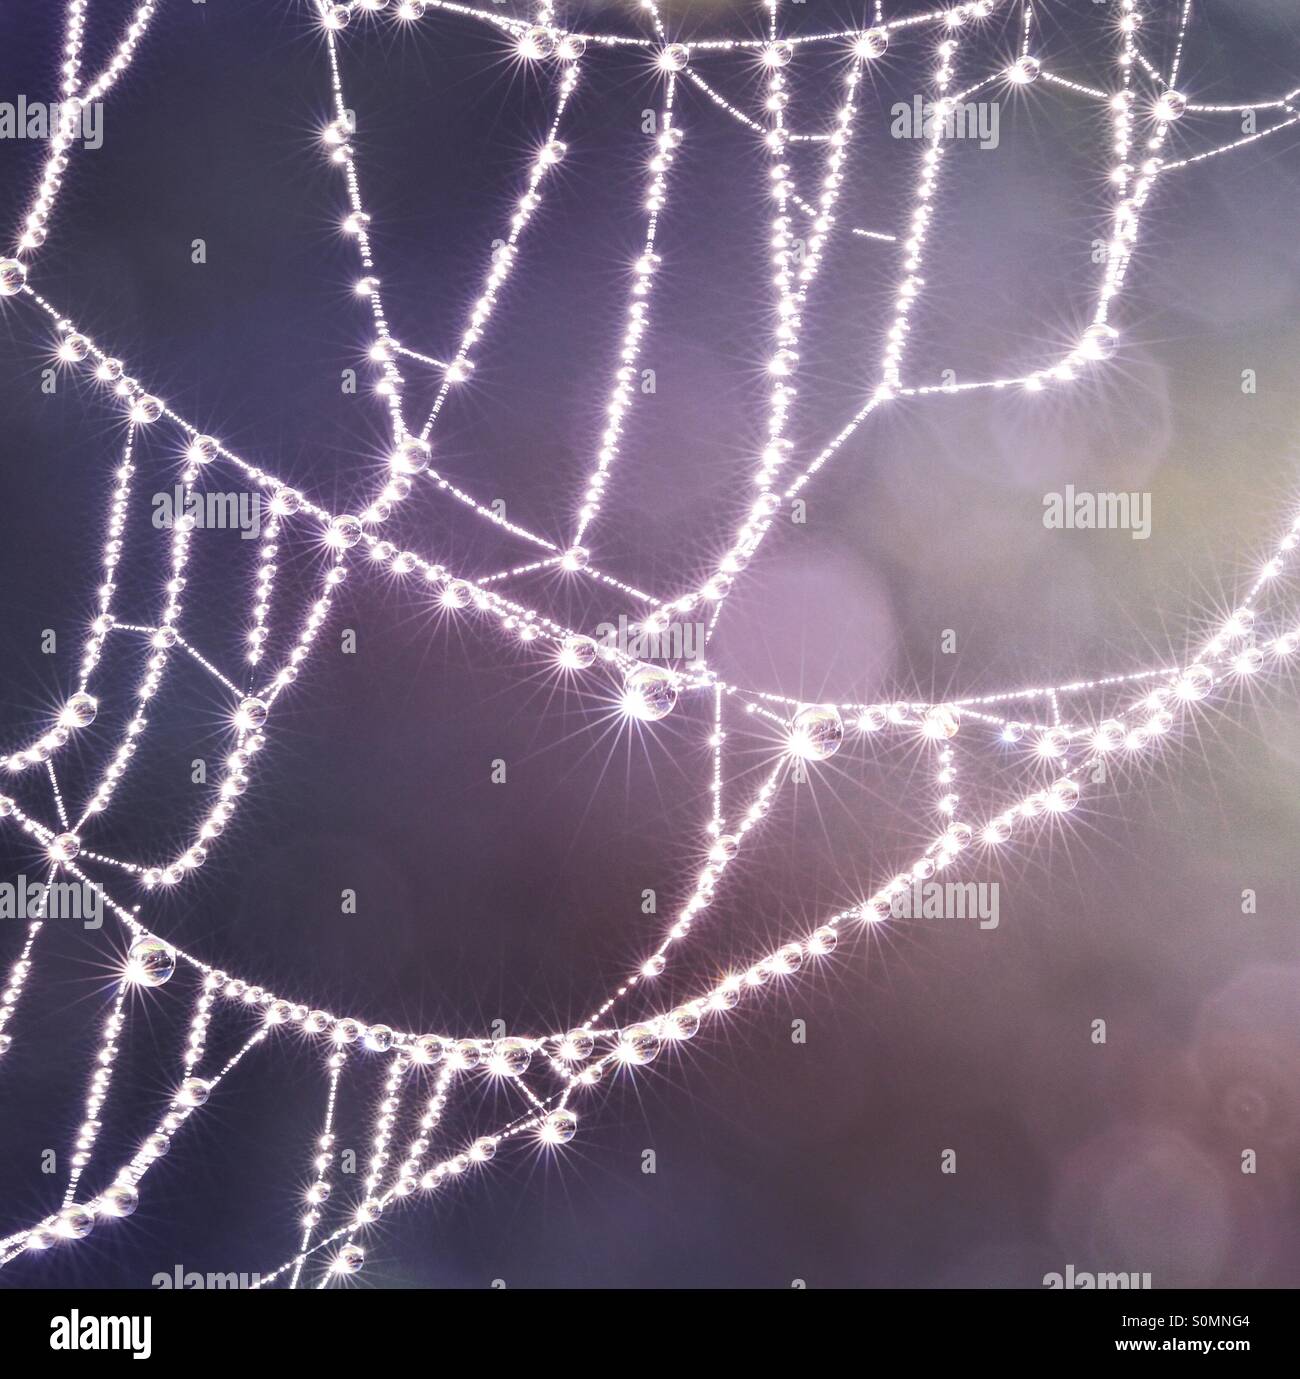 A spider's web covered in dew looking like glass jewellery that is glistening in bright light. String of pearls. Stock Photo